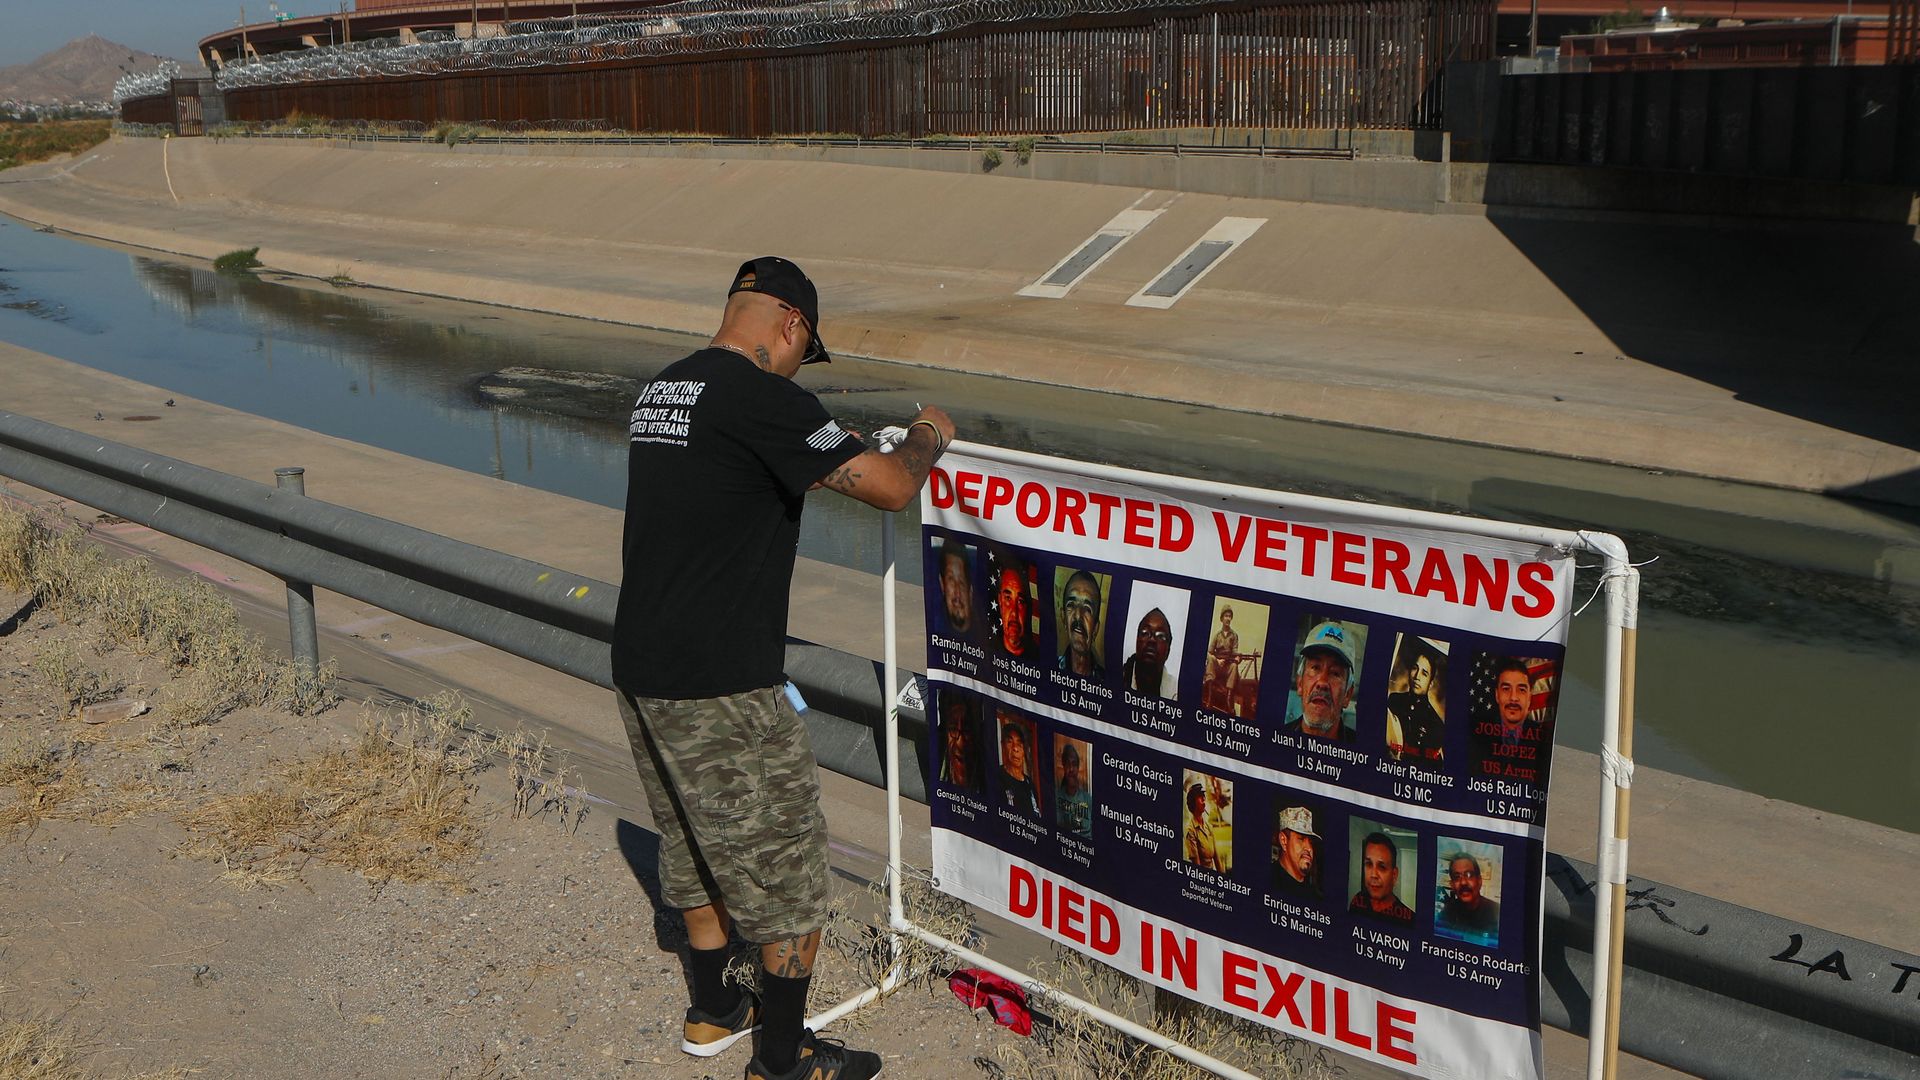 Ivan Ocon, a Mexican veteran of the U.S. Army deported to Mexico, ties a banner with pictures of deported veterans who died outside the US in front of the border wall in Ciudad Juarez, Mexico.